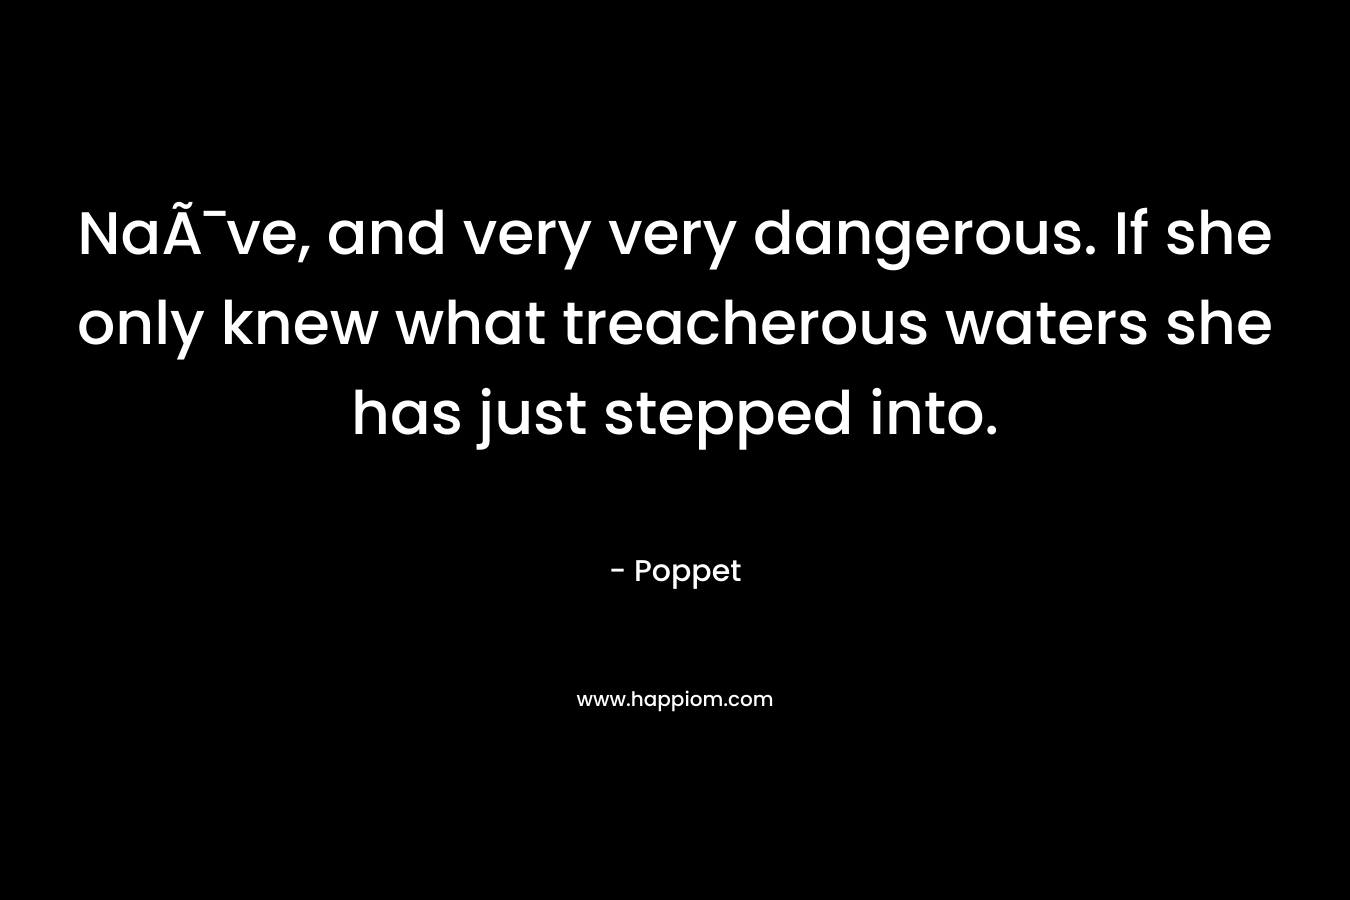 NaÃ¯ve, and very very dangerous. If she only knew what treacherous waters she has just stepped into. – Poppet